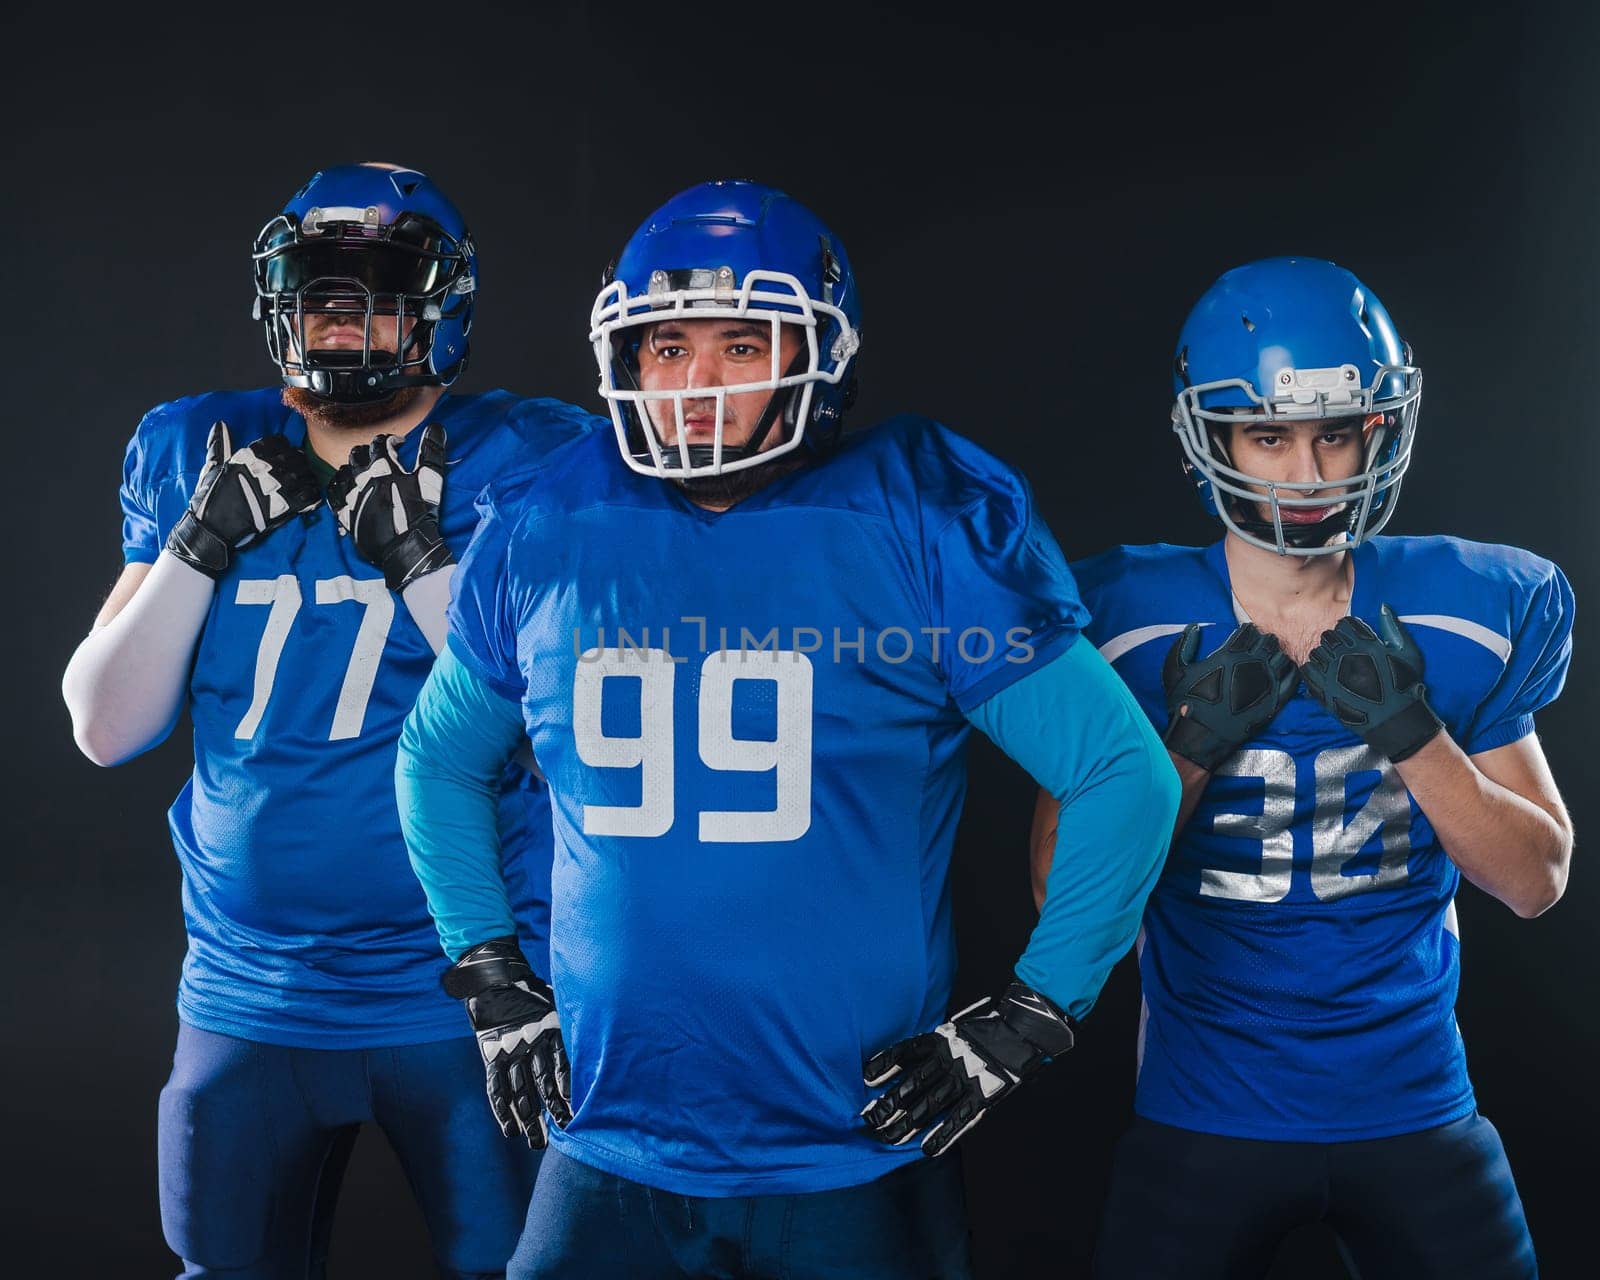 Portrait of three men in blue uniforms for American football on a black background. by mrwed54